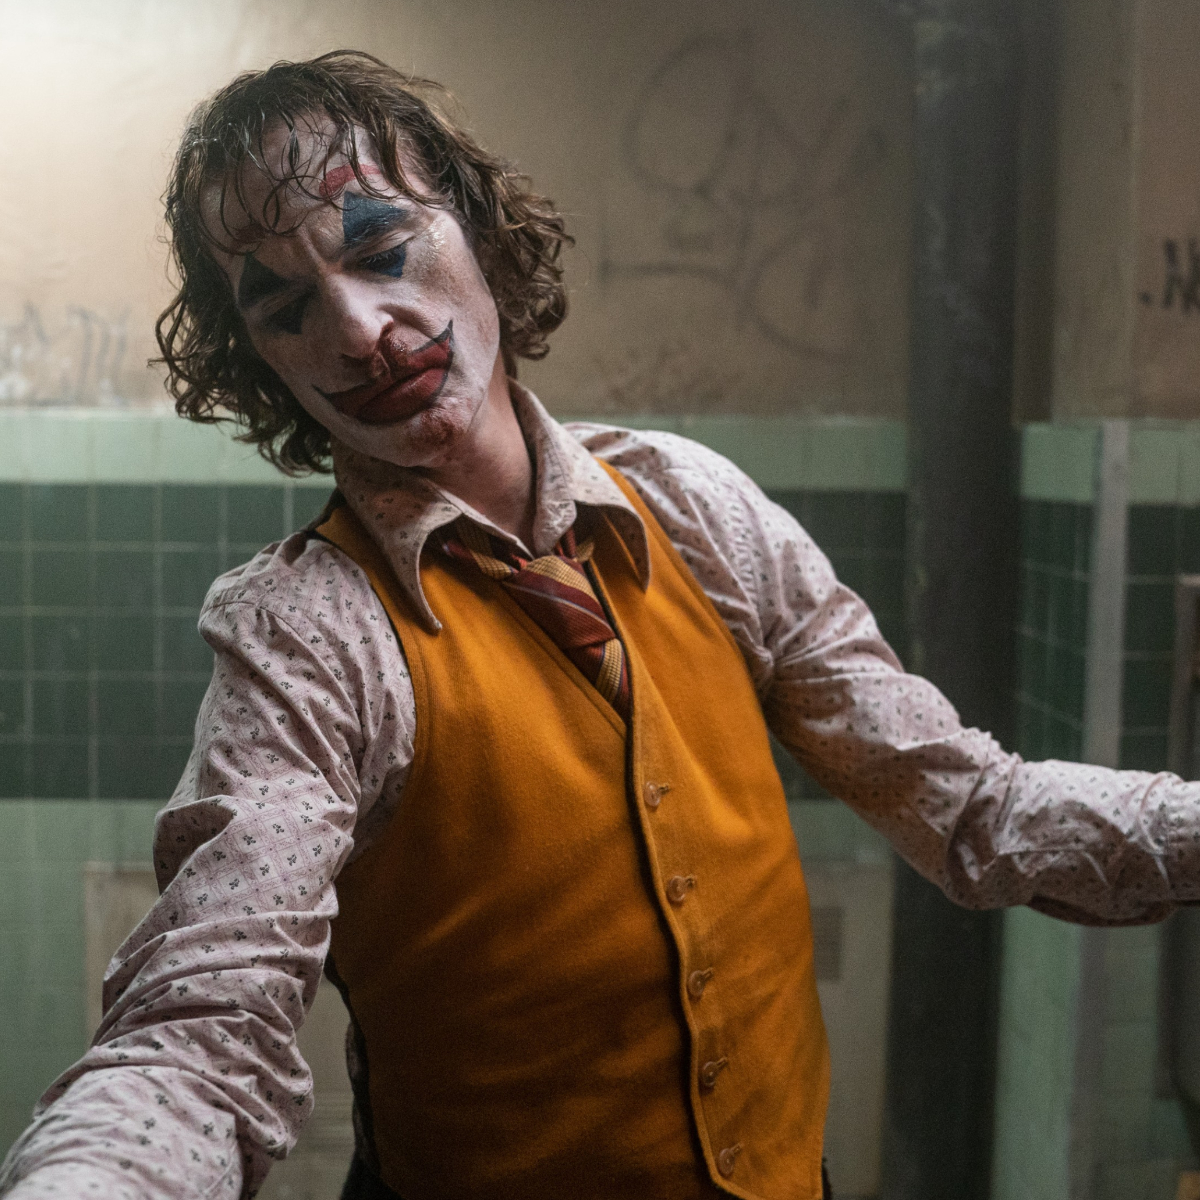 Joker Movie Review: Joaquin Phoenix's heartbreakingly humanising act will leave you flabbergasted